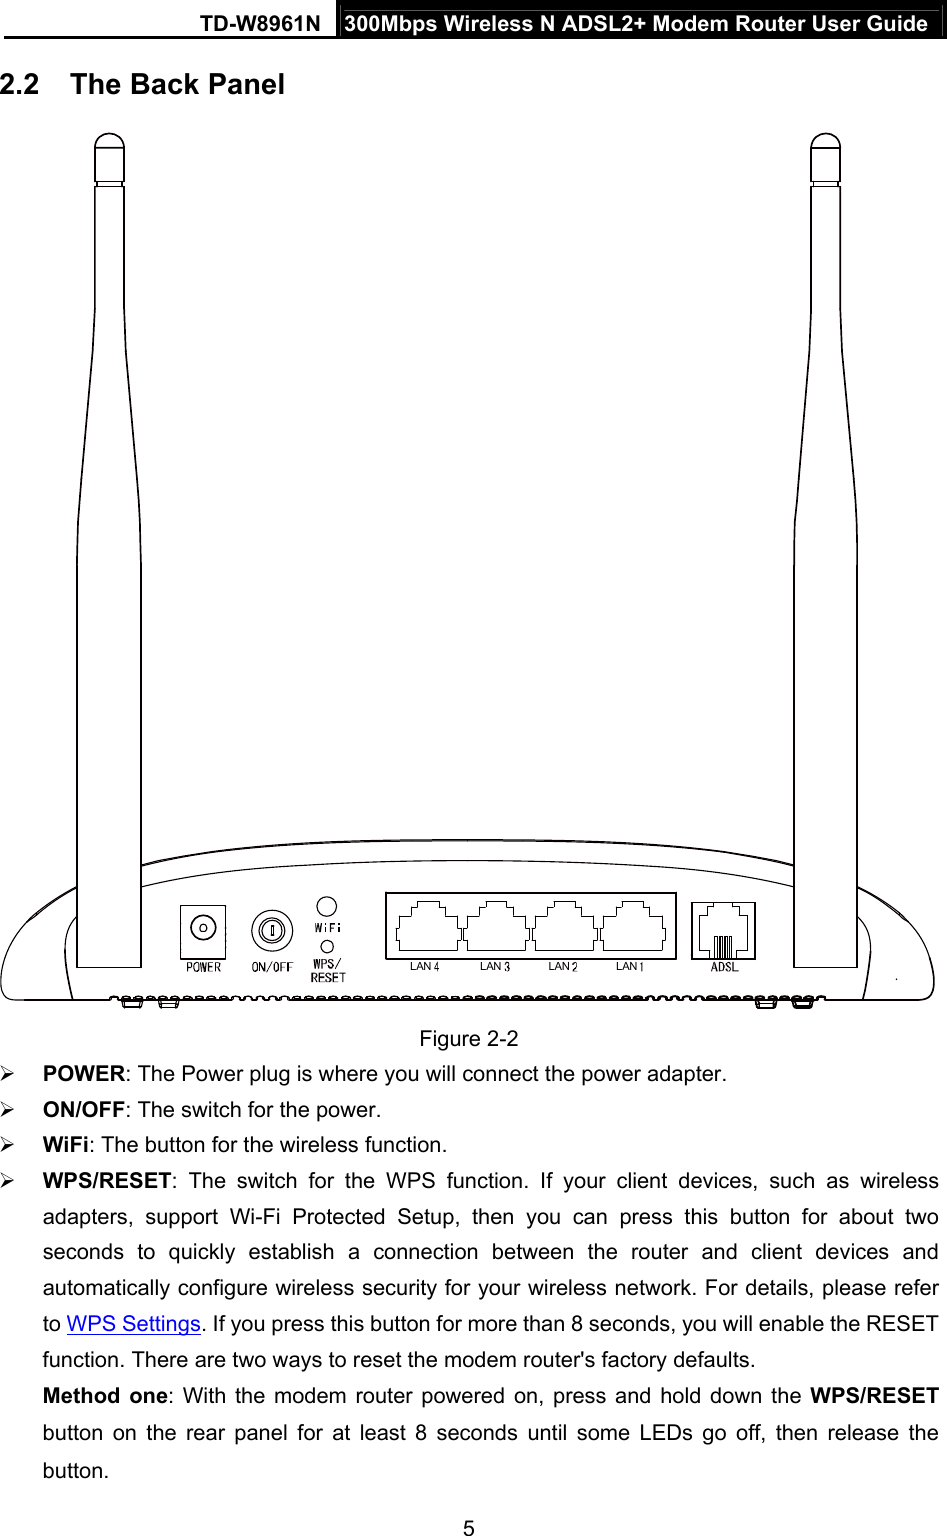 TD-W8961N  300Mbps Wireless N ADSL2+ Modem Router User Guide 5  2.2  The Back Panel LAN LAN LAN LAN Figure 2-2  POWER: The Power plug is where you will connect the power adapter.  ON/OFF: The switch for the power.  WiFi: The button for the wireless function.    WPS/RESET: The switch for the WPS function. If your client devices, such as wireless adapters, support Wi-Fi Protected Setup, then you can press this button for about two seconds to quickly establish a connection between the router and client devices and automatically configure wireless security for your wireless network. For details, please refer to WPS Settings. If you press this button for more than 8 seconds, you will enable the RESET function. There are two ways to reset the modem router&apos;s factory defaults.   Method one: With the modem router powered on, press and hold down the WPS/RESET button on the rear panel for at least 8 seconds until some LEDs go off, then release the button. 